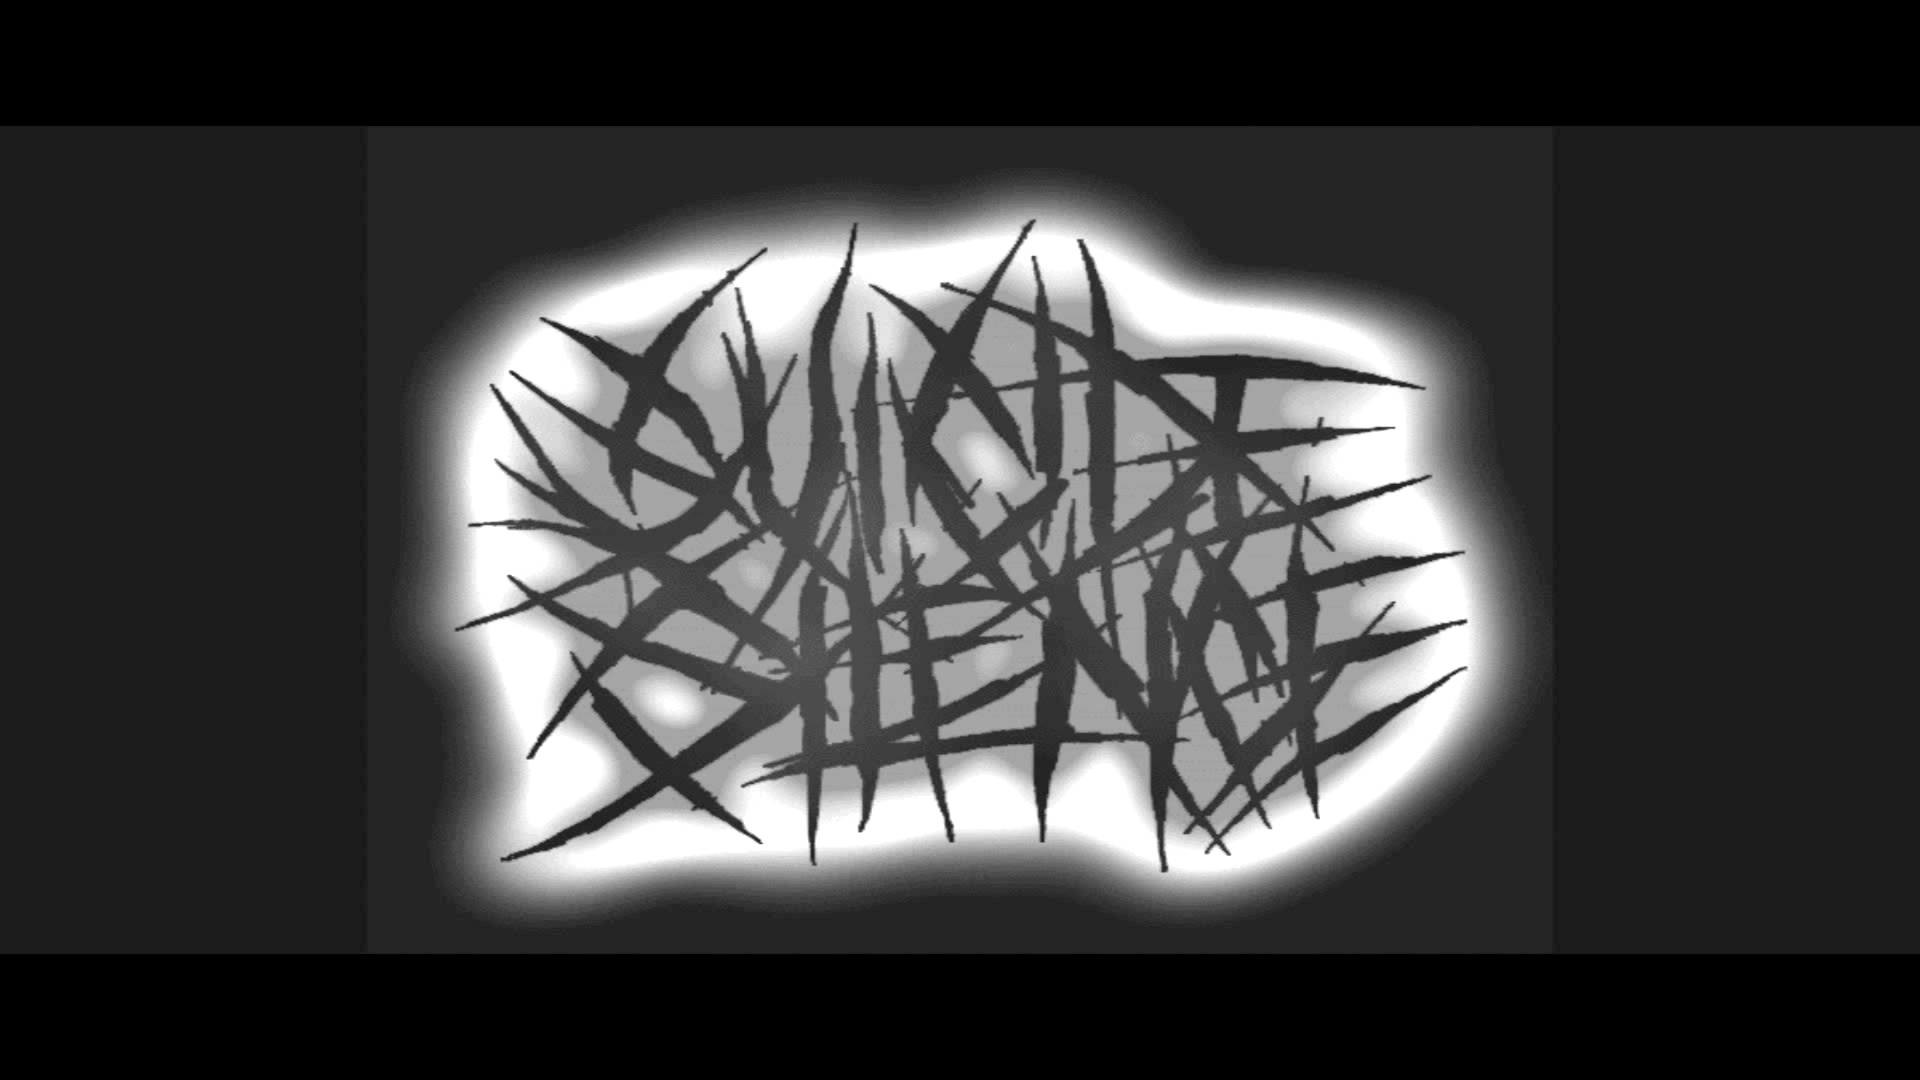 1920x1080 Suicide Silence Wallpaper